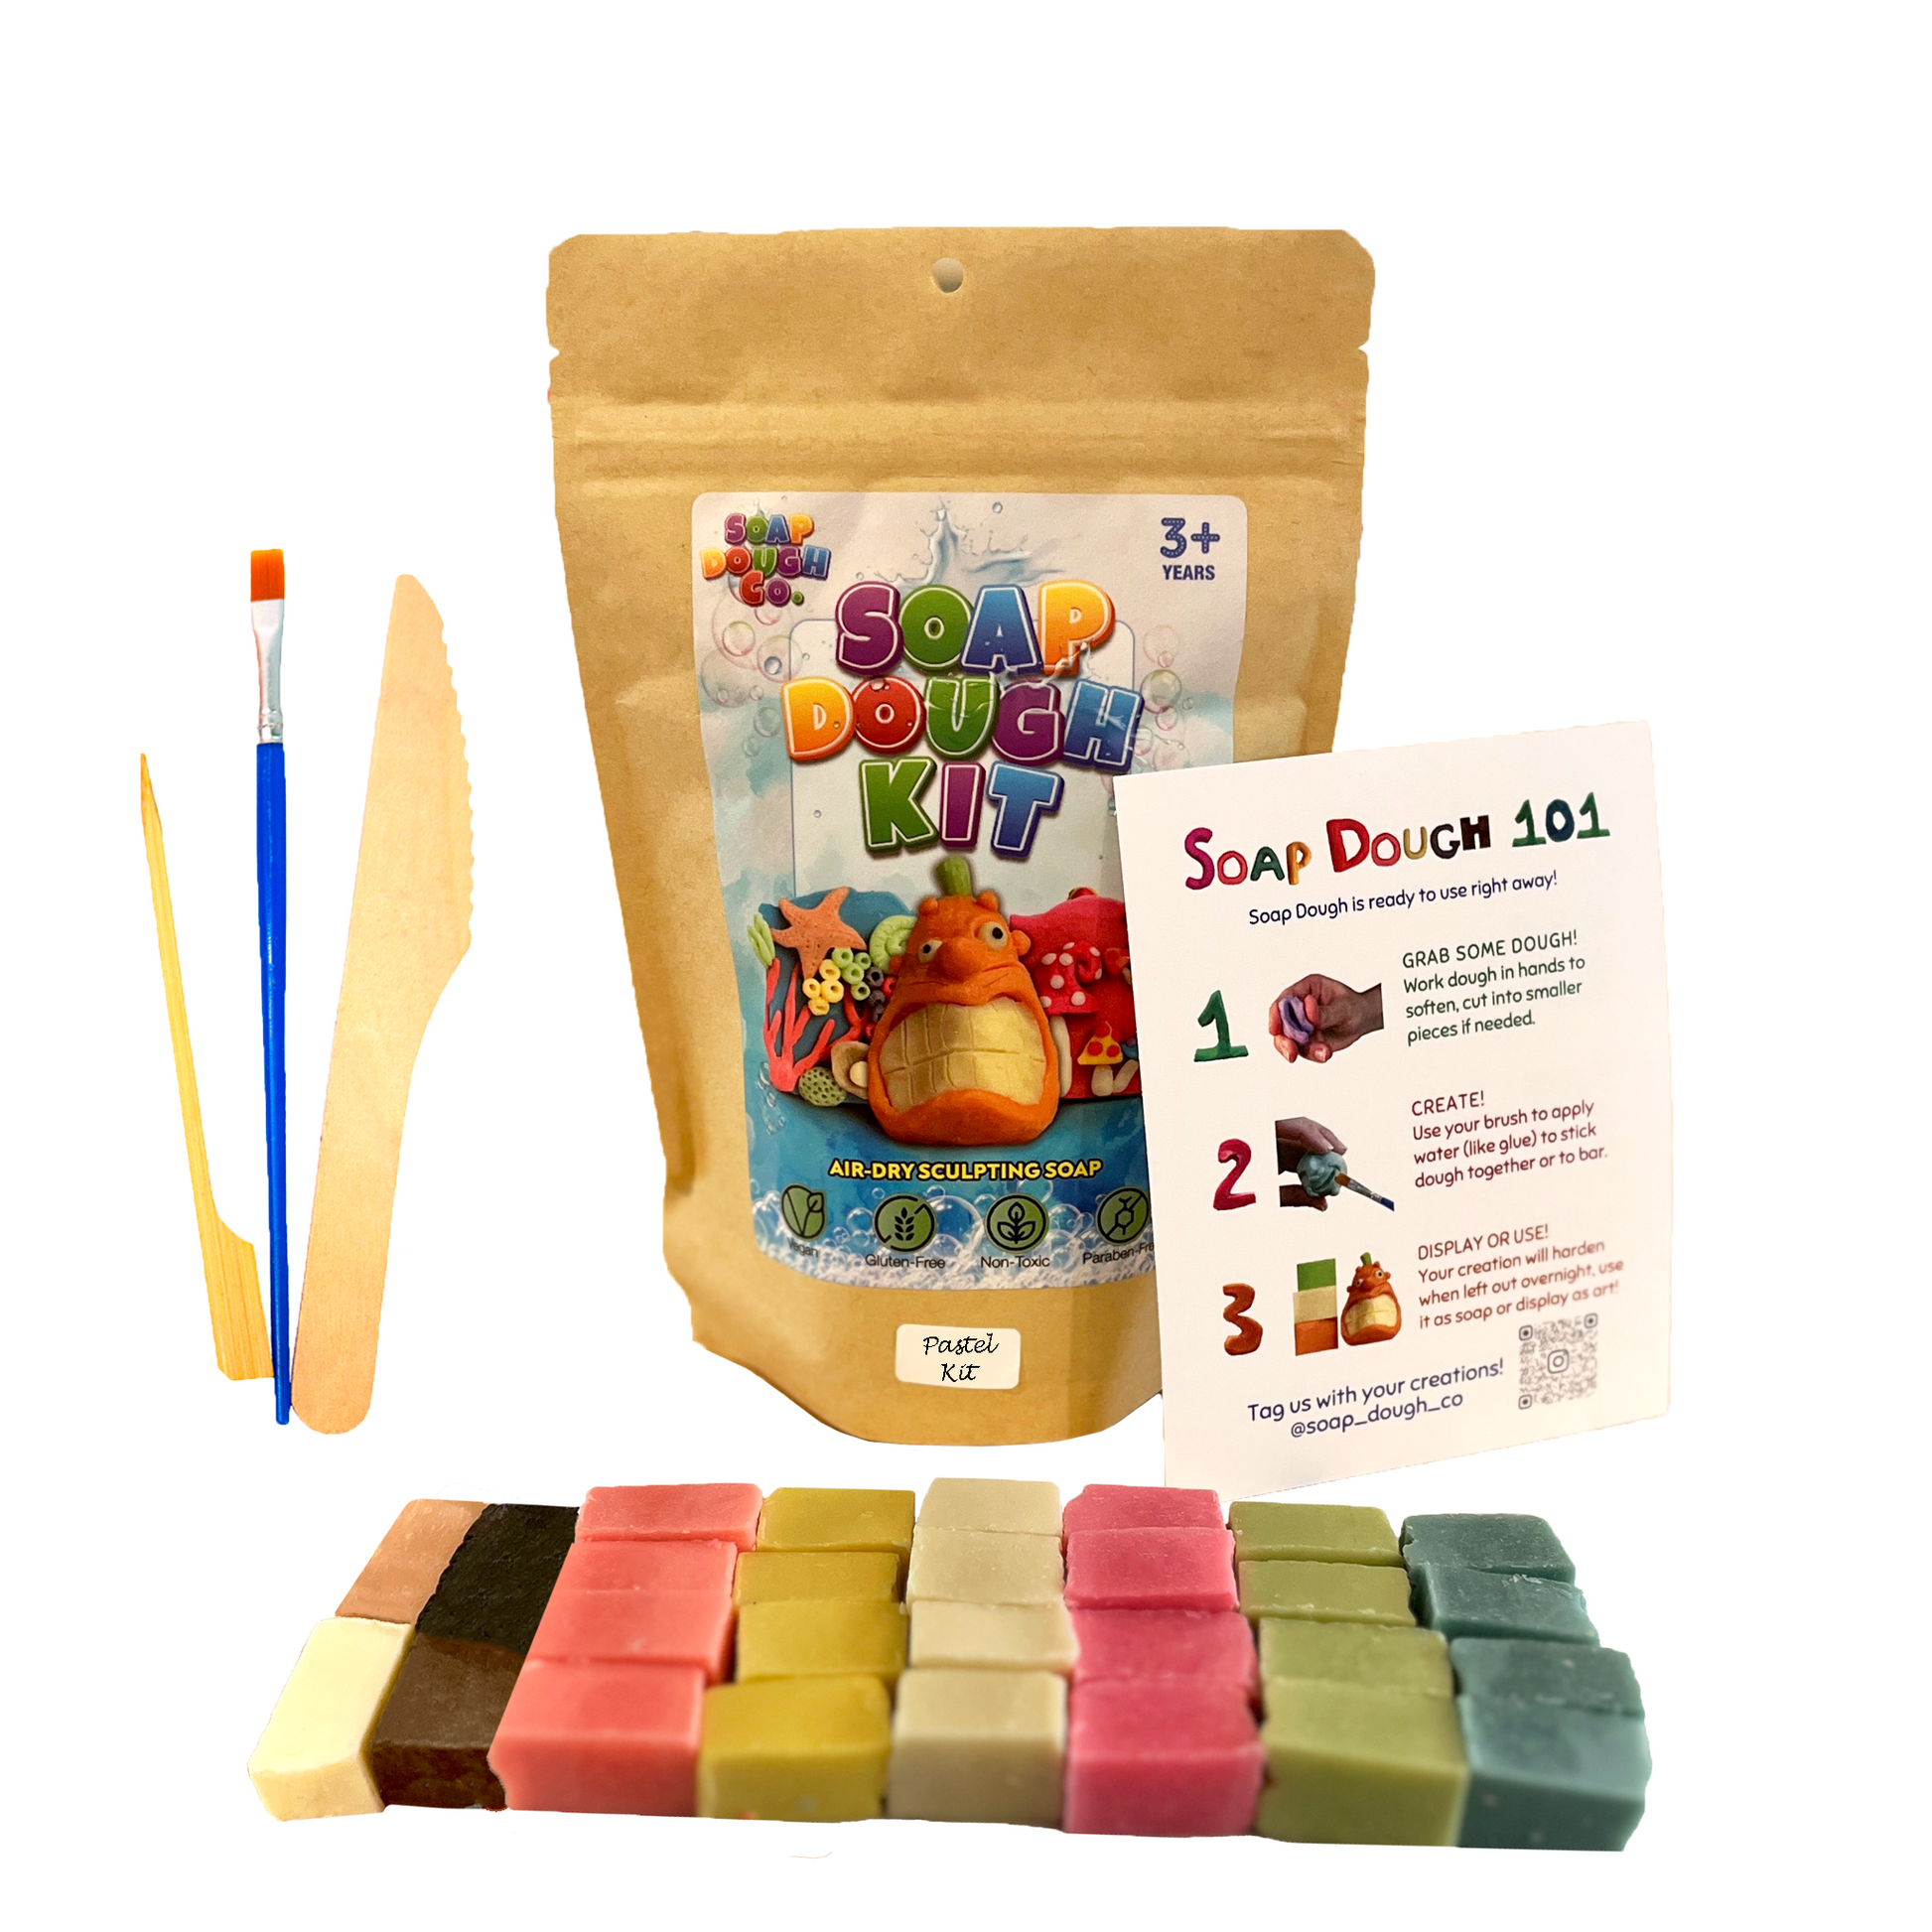 Soap Dough Co. - Pastel Kit - Wall of pastel yellow, pink, green, orange, blue, and white with eco-bag, instructions, and tools next to soap dough cubes with accent colors.